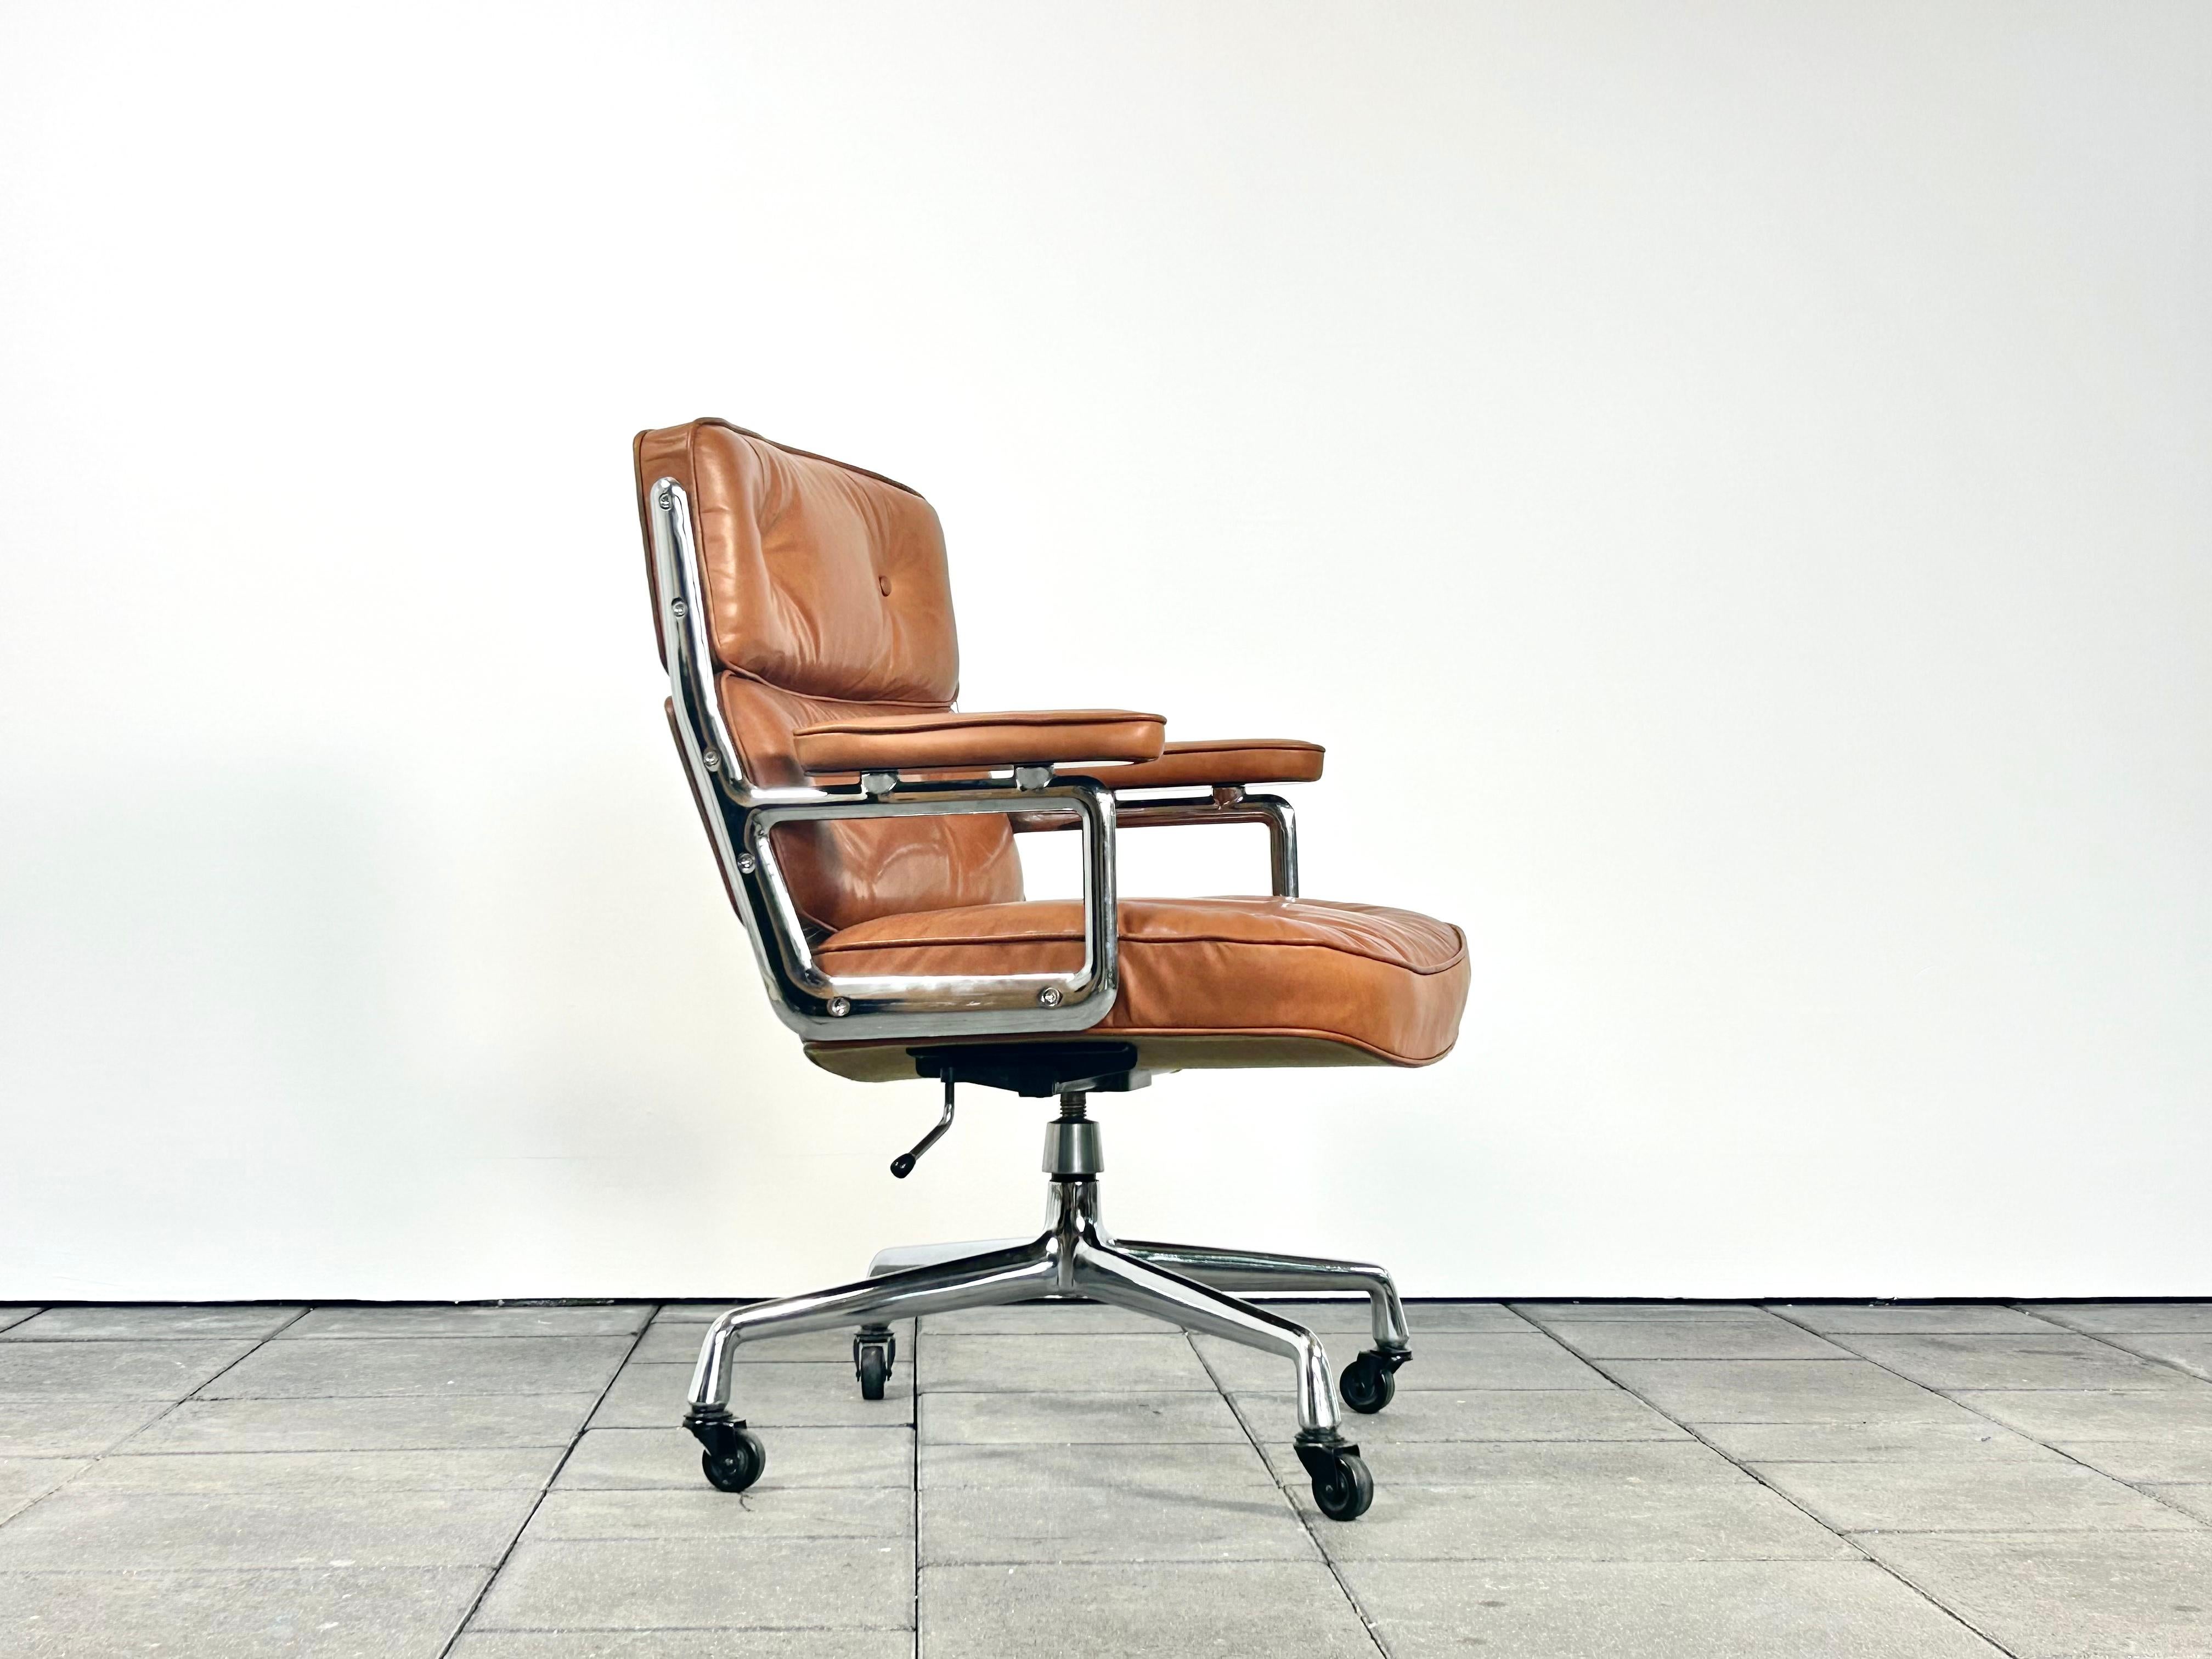 Herman Miller ES104 Time Life chair, designed by Charles & Ray Eames in 1960.

Re-upholstered in dark-Cognac anilin leather, with chromed aluminium parts, equipped with shivel & tilt function, height adjustable.

The chair is in very good